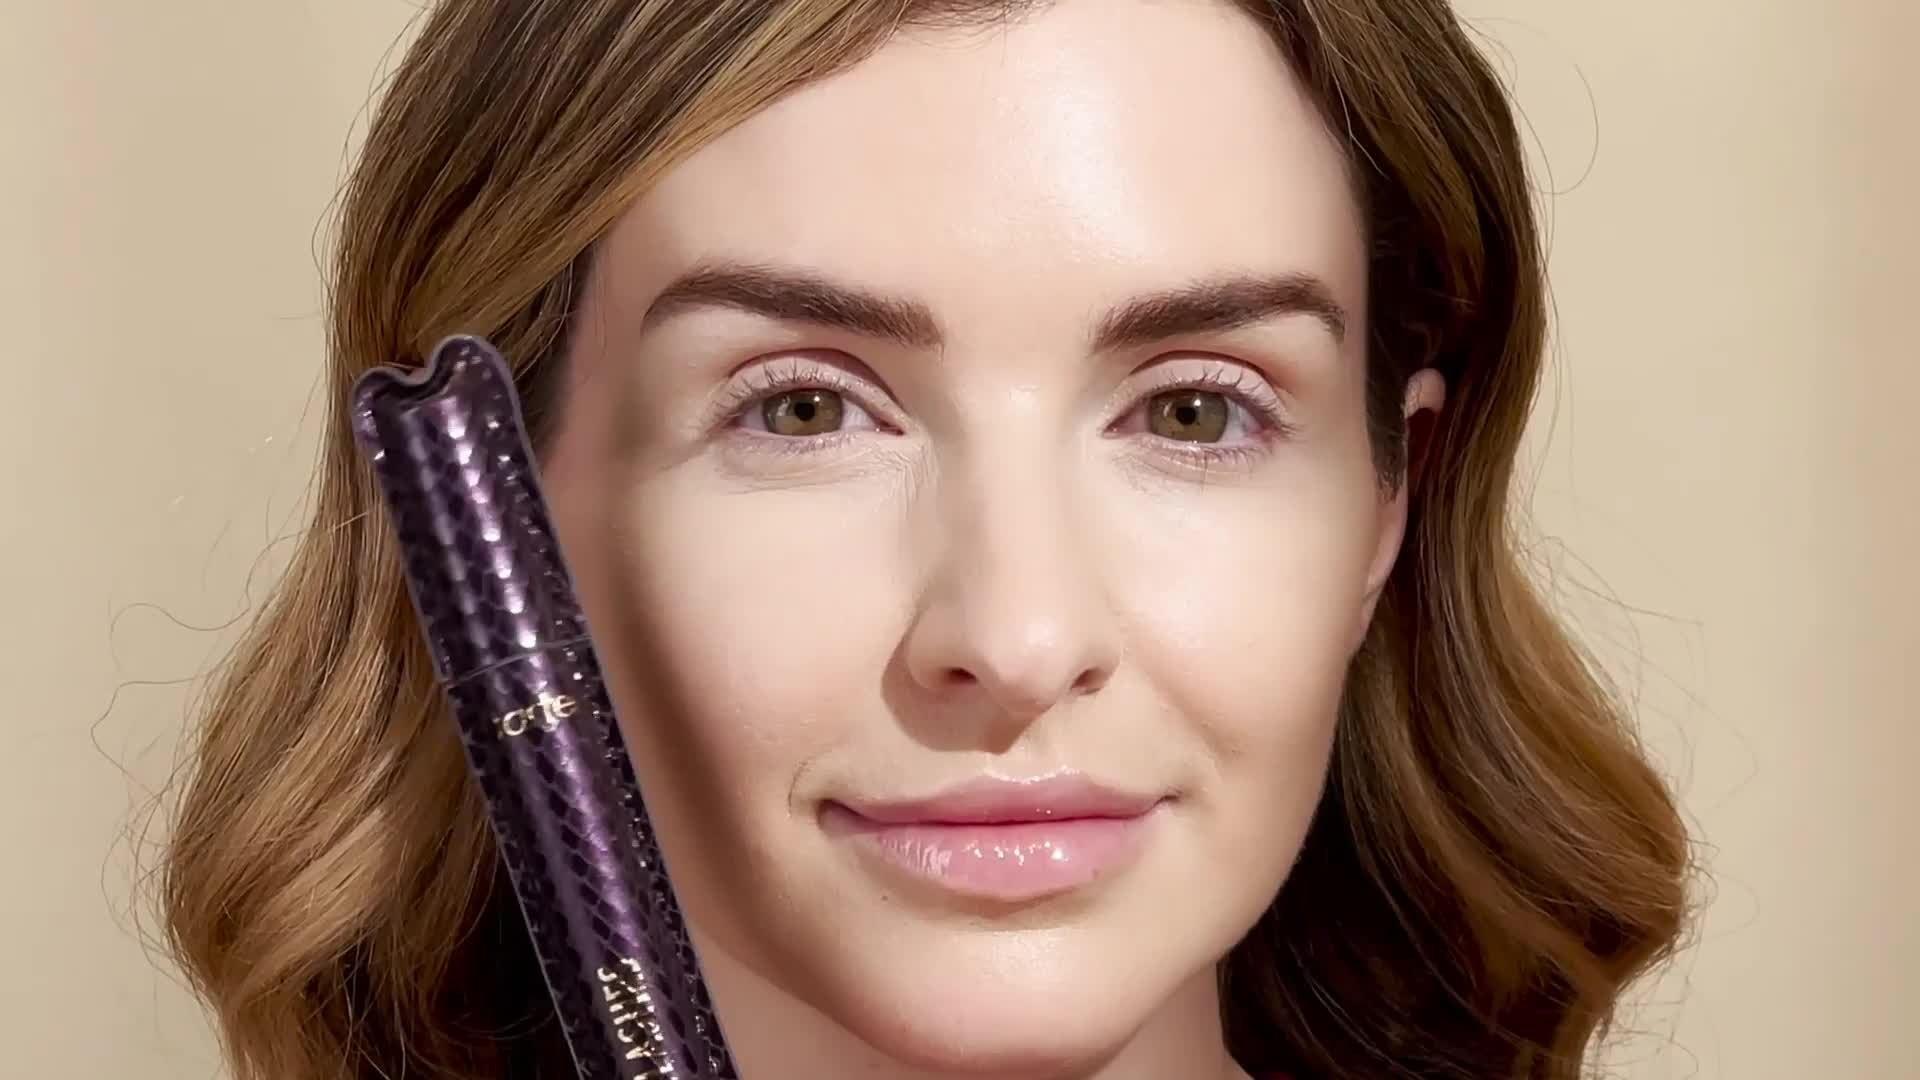 Pin on Mascara Must Haves